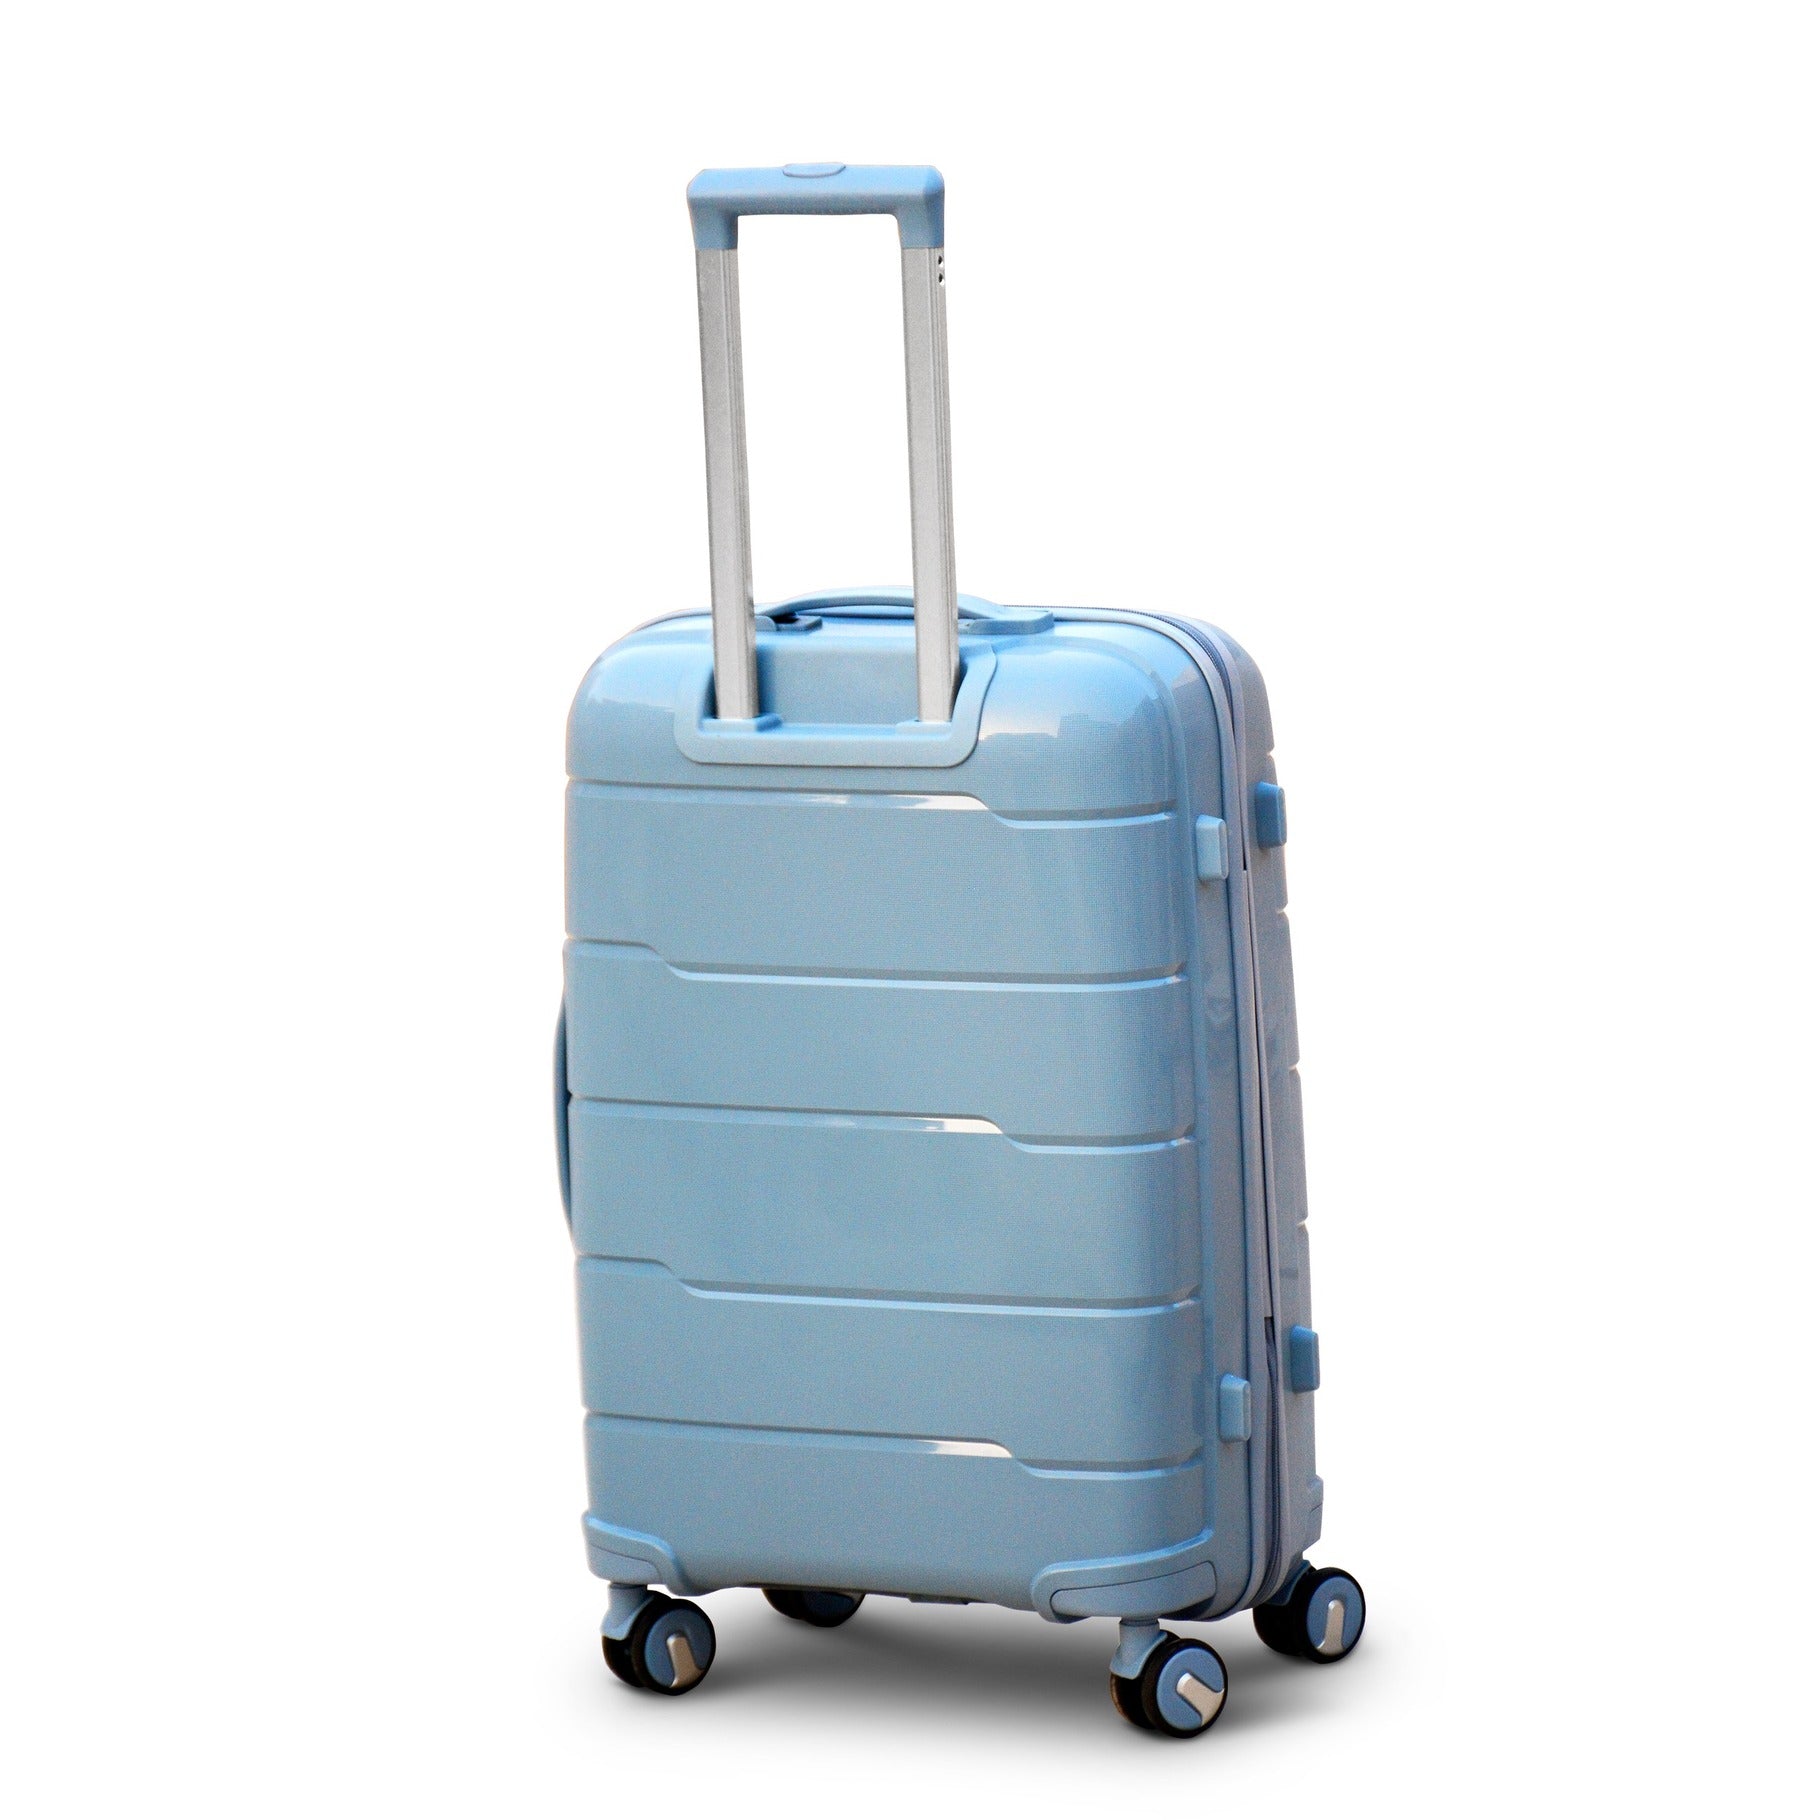 20" Grey Colour Non Expandable Ceramic PP Luggage Lightweight Hard Case Carry On Trolley Bag with Double Spinner Wheel